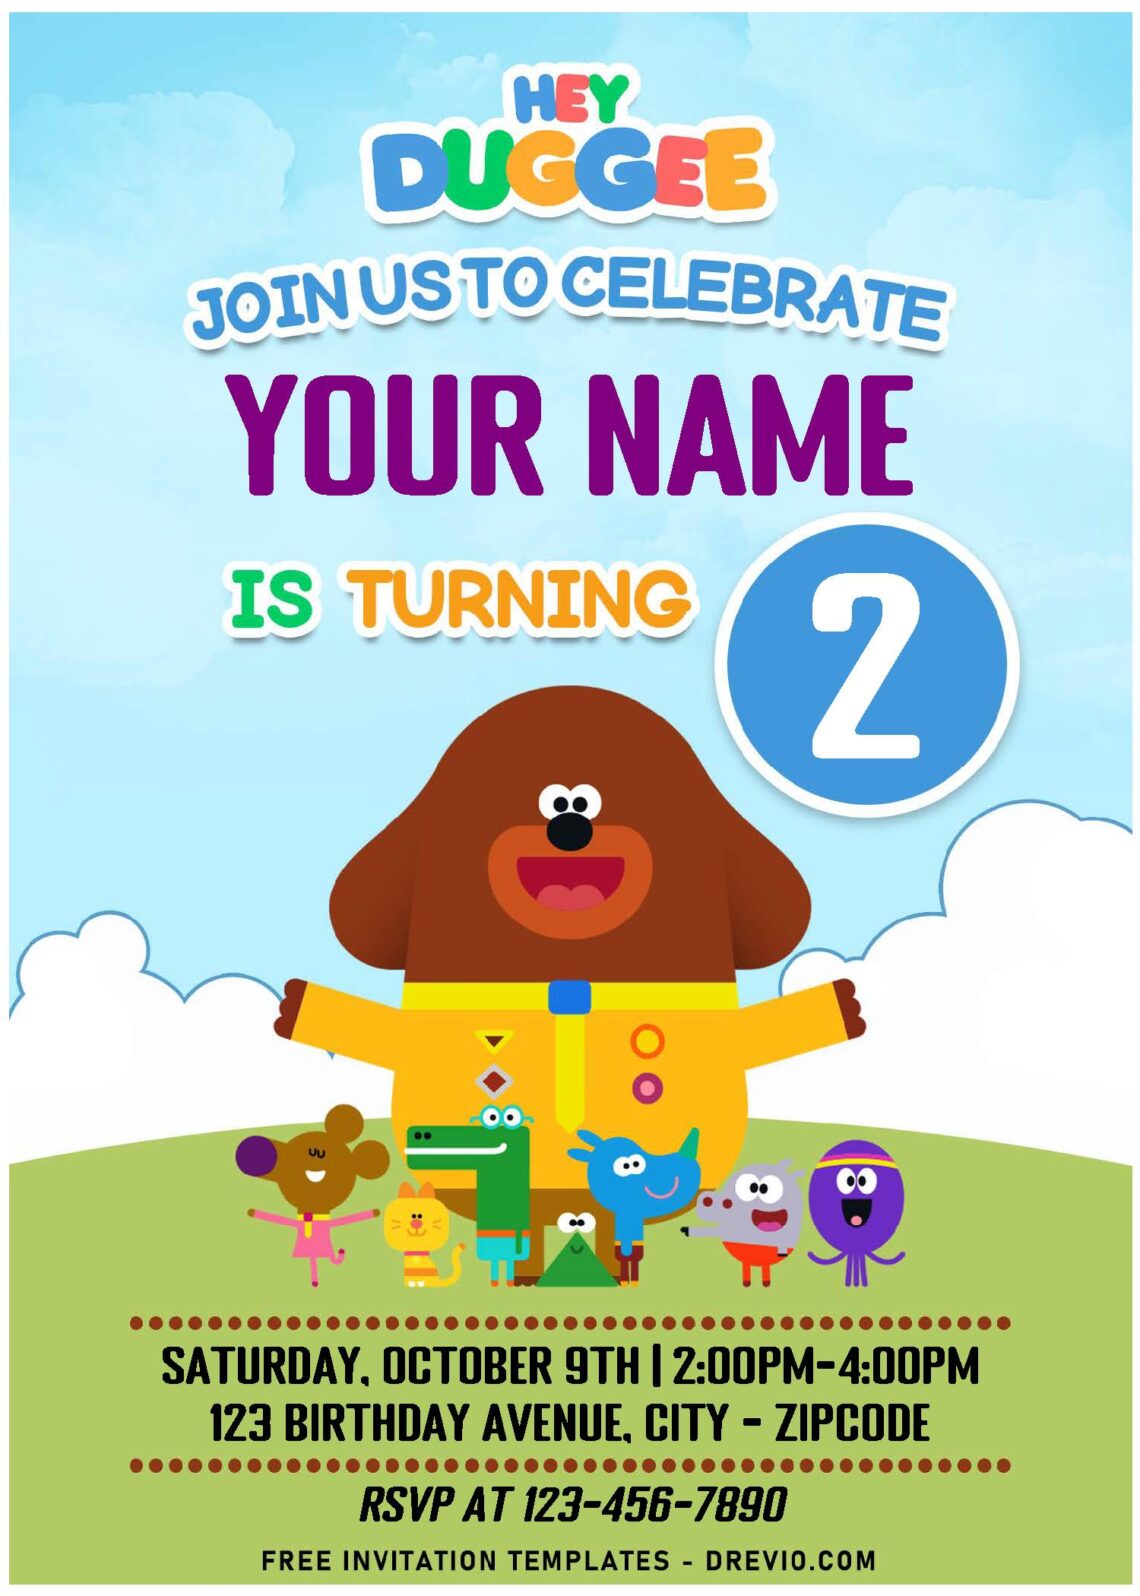 (Free Editable PDF) Whoof Whoof Hey Duggee Birthday Invitation Templates with bright design